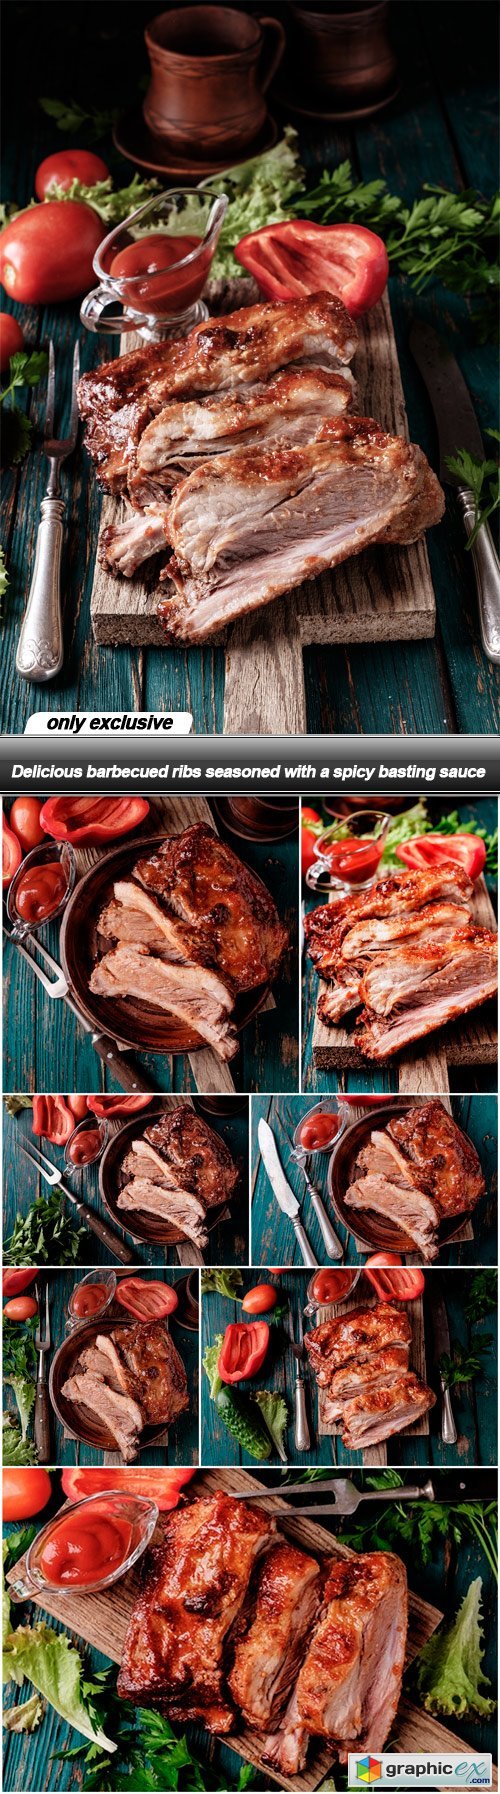 Delicious barbecued ribs seasoned with a spicy basting sauce - 8 UHQ JPEG